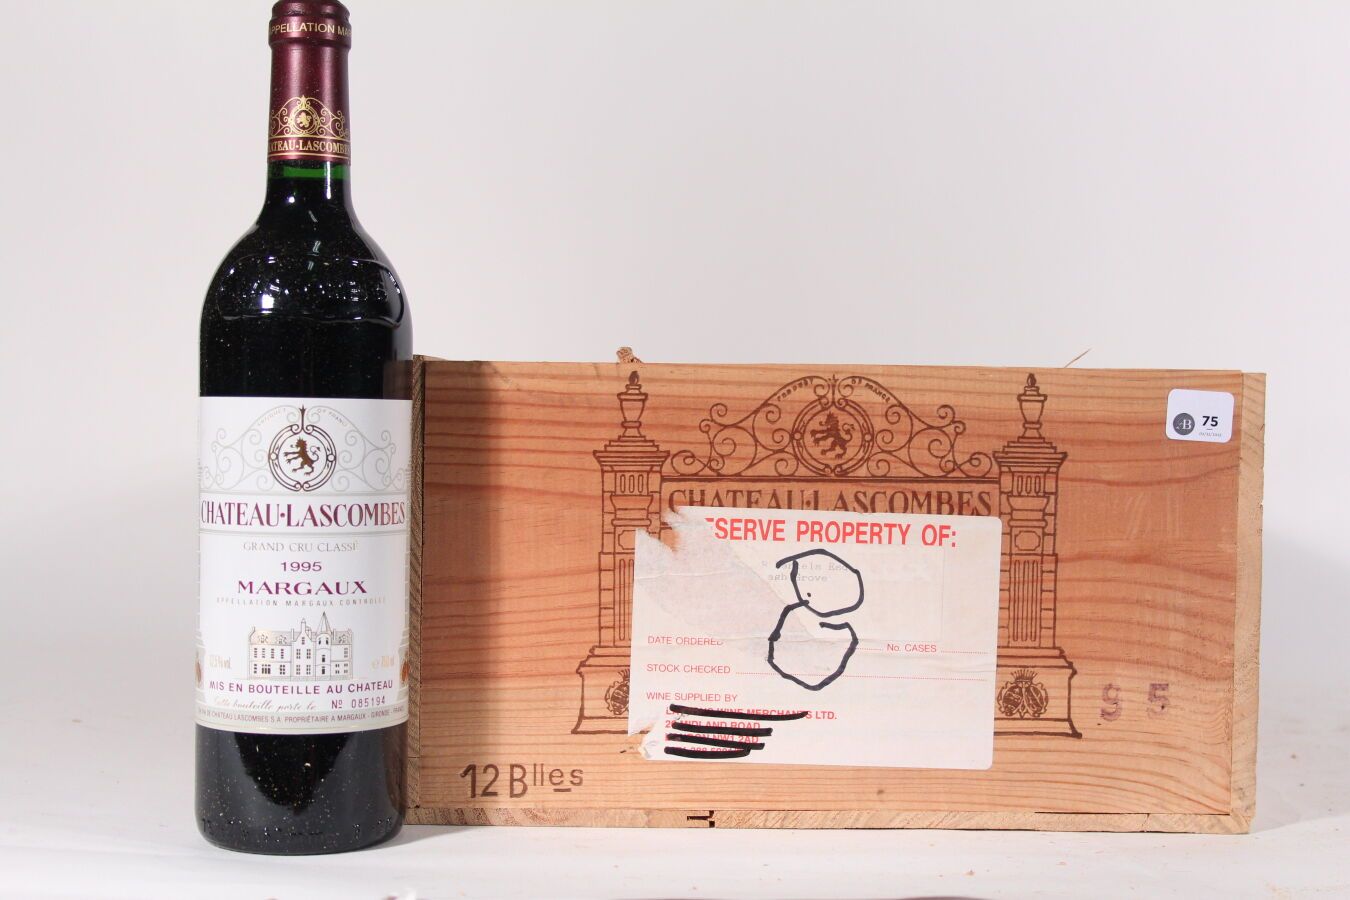 Null 1995 - Château Lascombes
Margaux Rot - 12 blles CBO